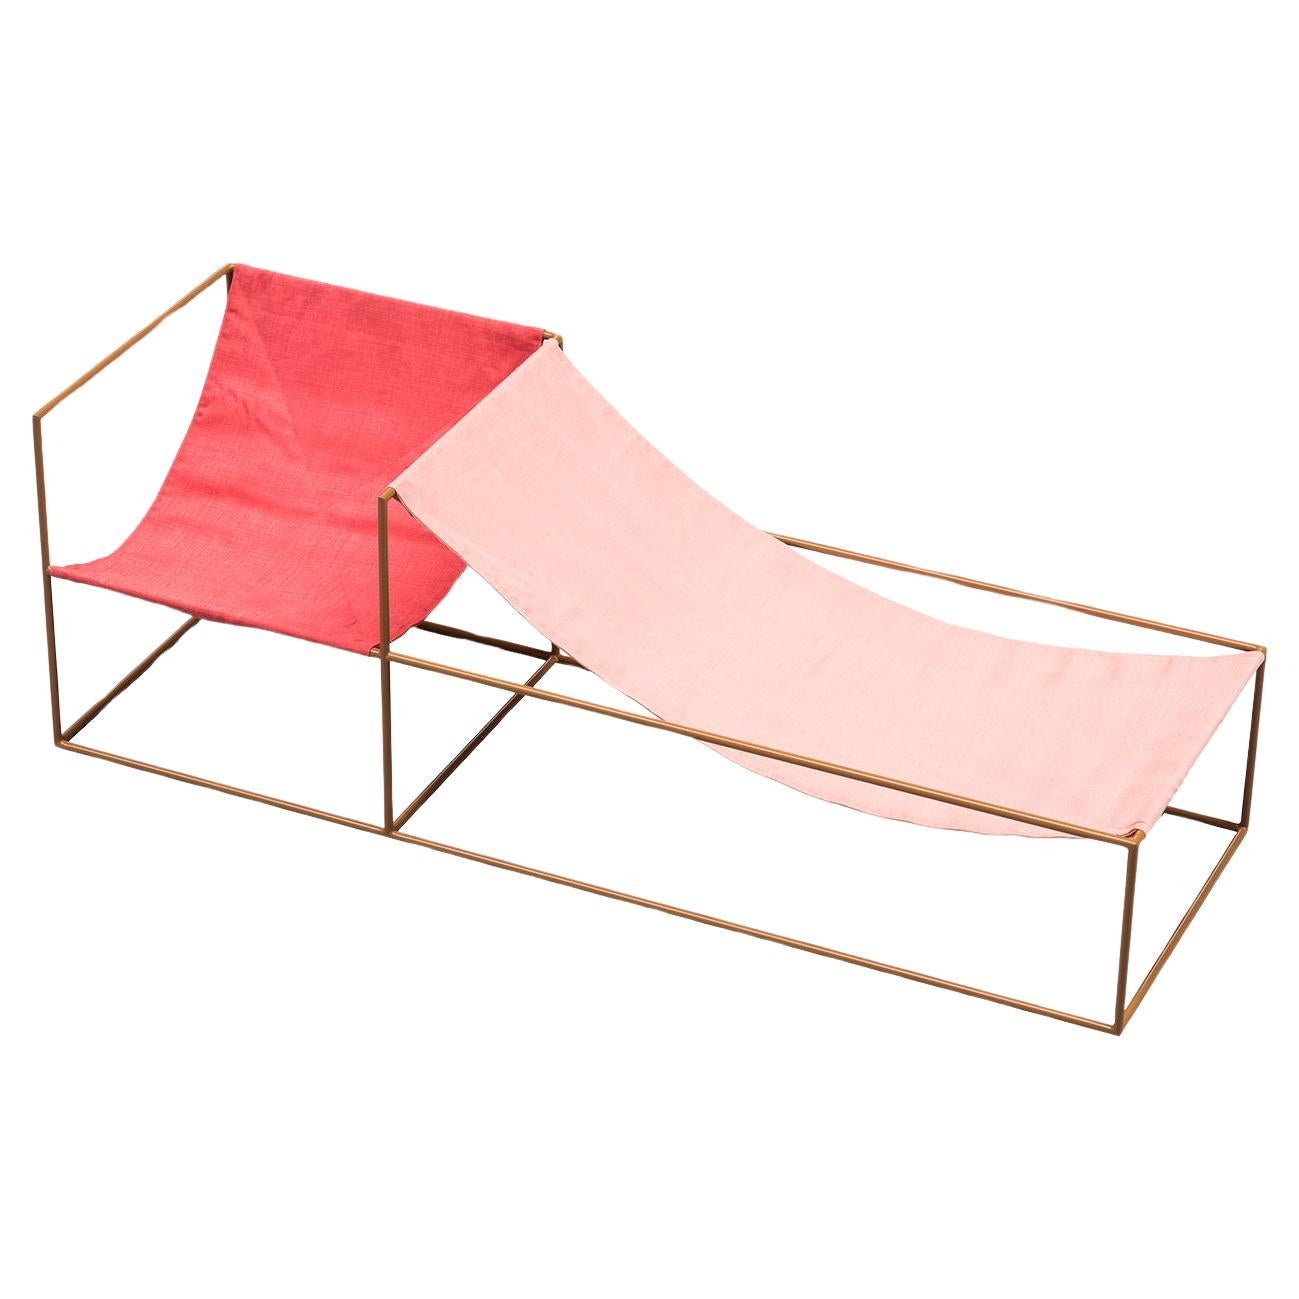 Contemporary Chair 'Duo Seat' by Muller Van Severen, Red + Pink